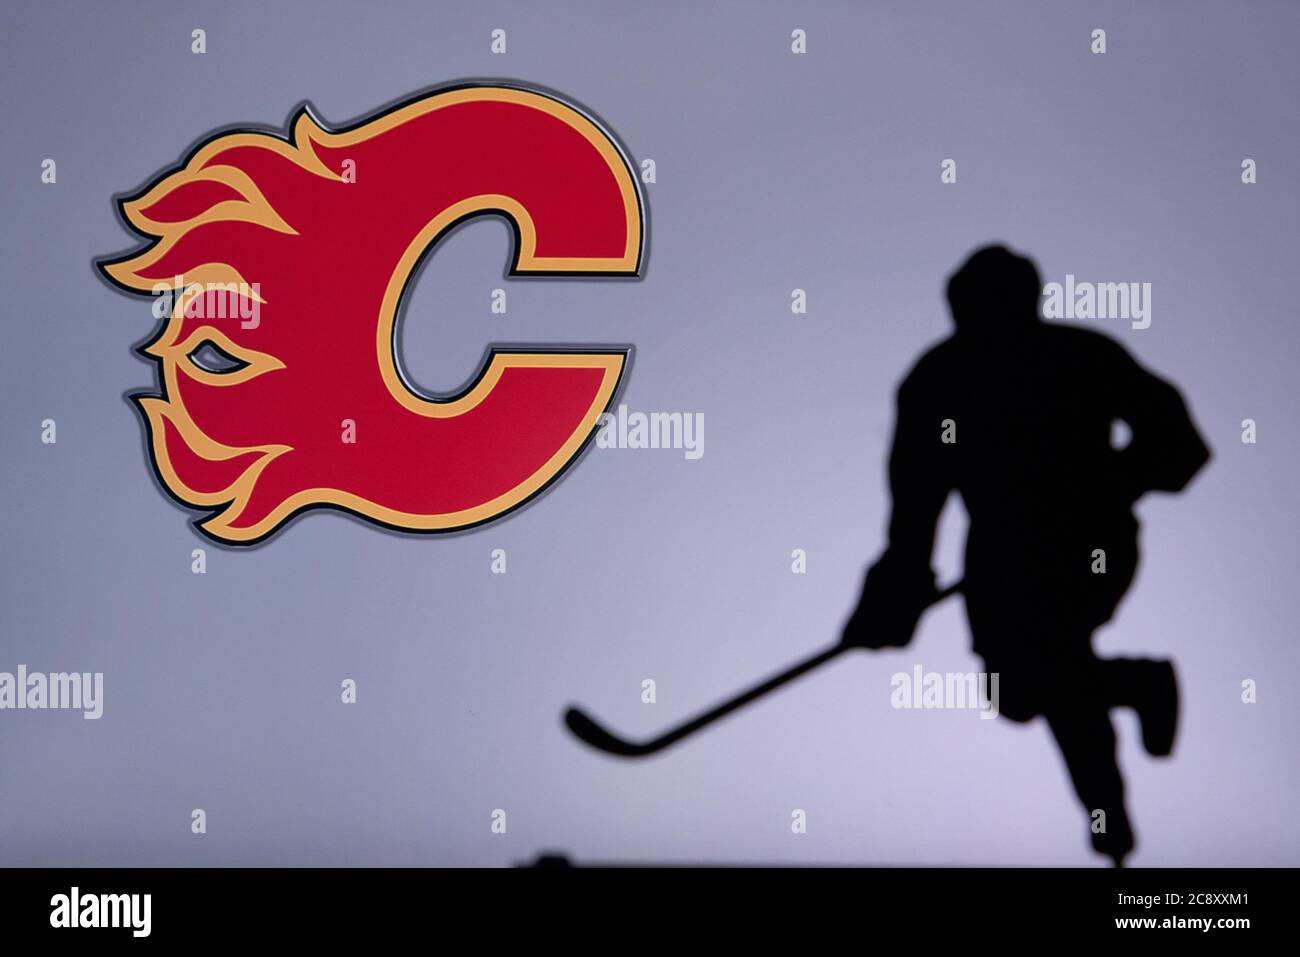 A Close Up To a Calgary Flames Logo on a Red Hockey Jersey Editorial Photo  - Image of jersey, design: 191743636